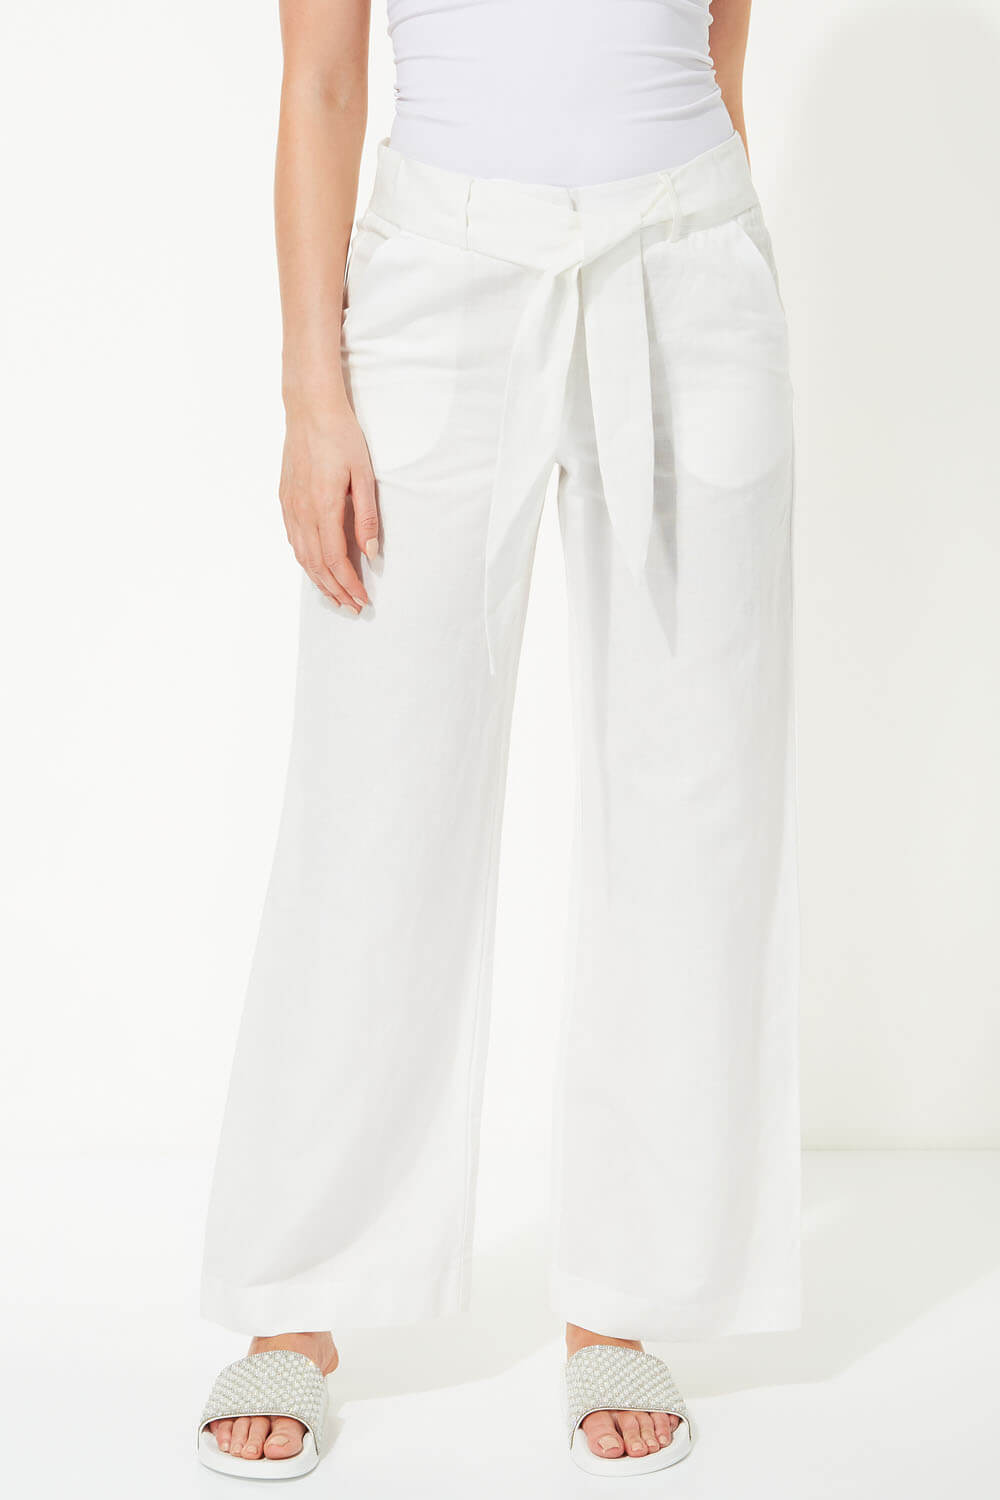 How to Wear Linen Trousers: 5 Chic Outfit Ideas | Who What Wear UK